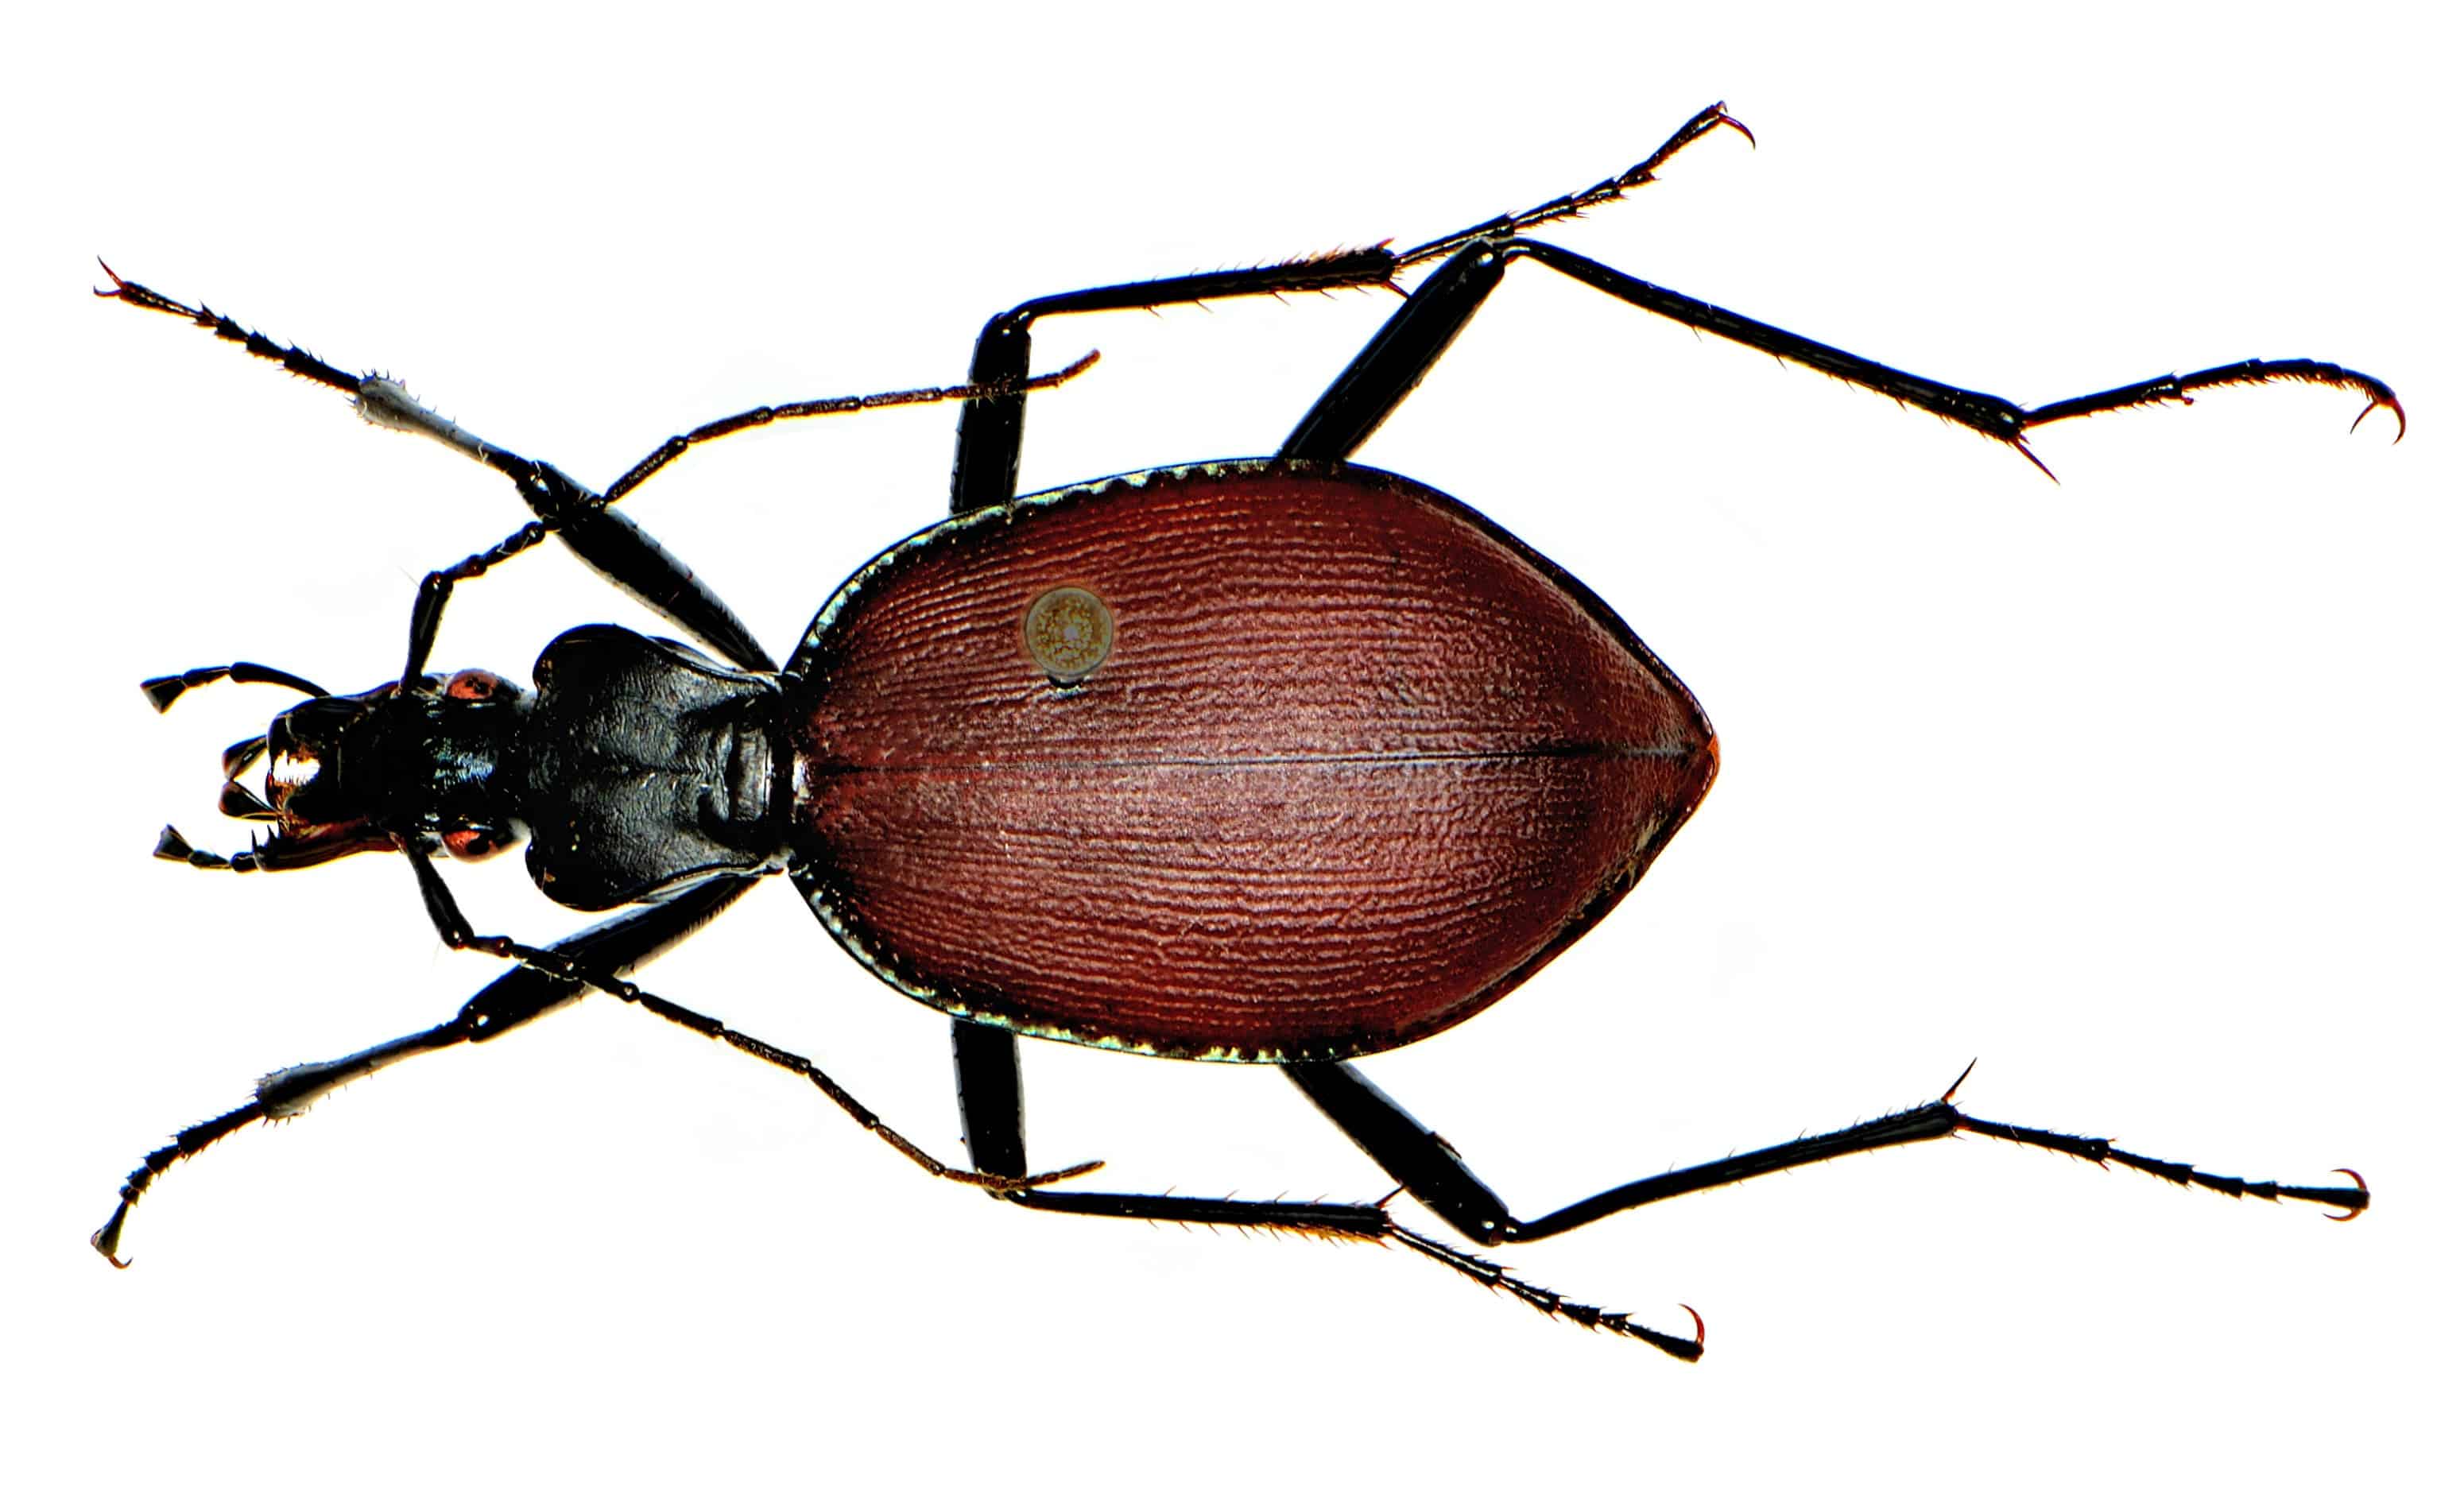 One of the beetles studied from the museum's collection. Image credits: Michael K. Oliver.